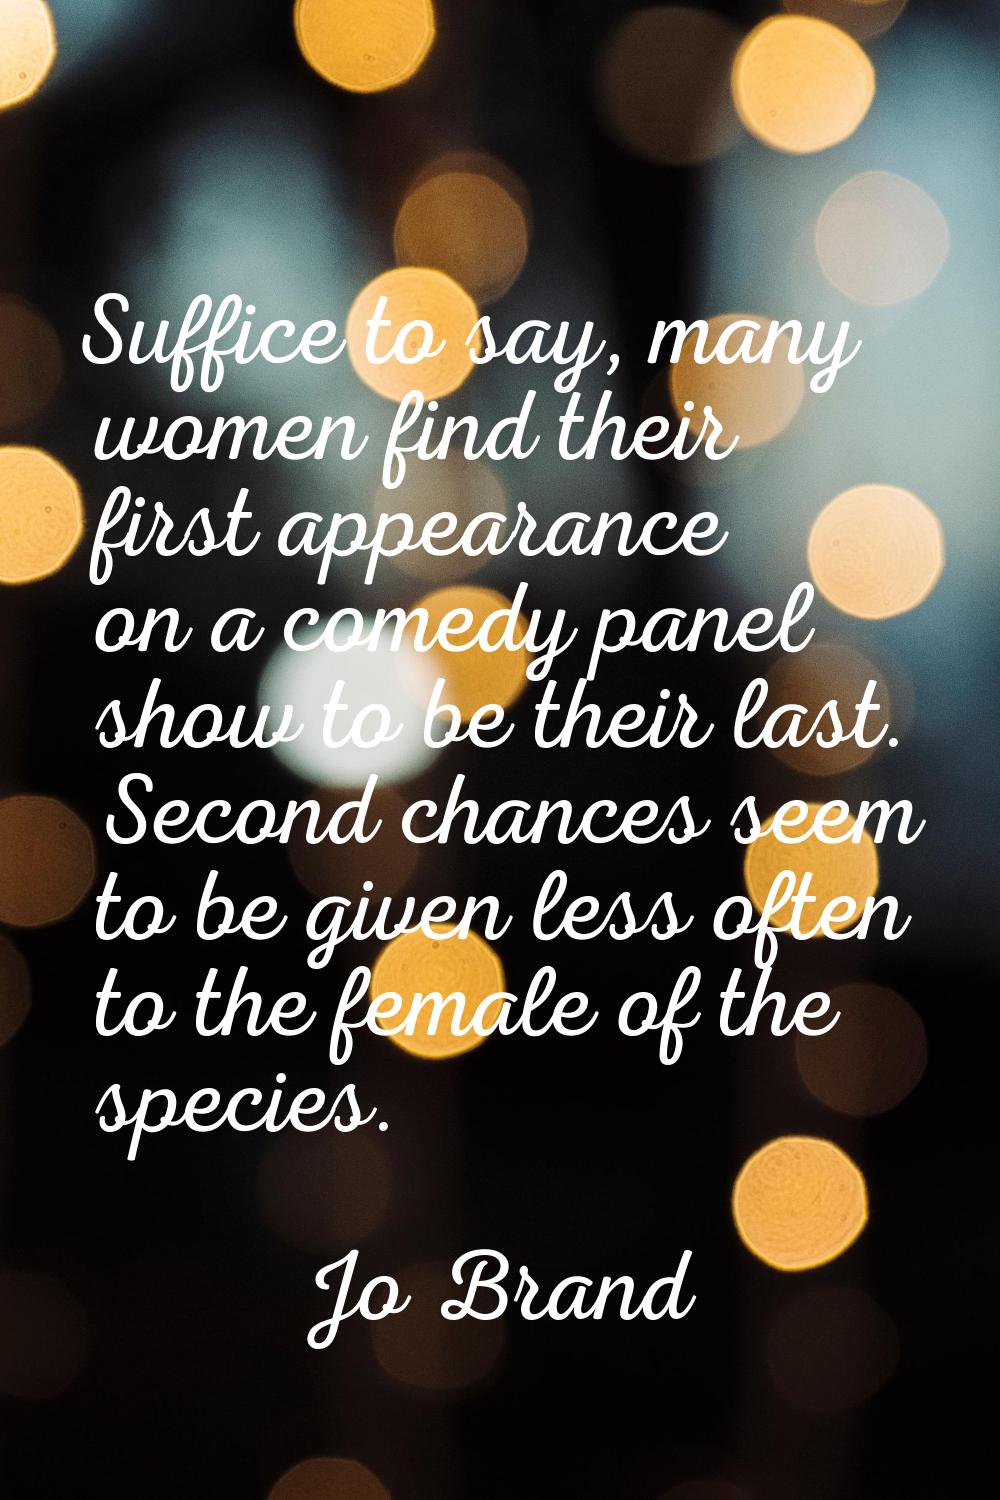 Suffice to say, many women find their first appearance on a comedy panel show to be their last. Sec